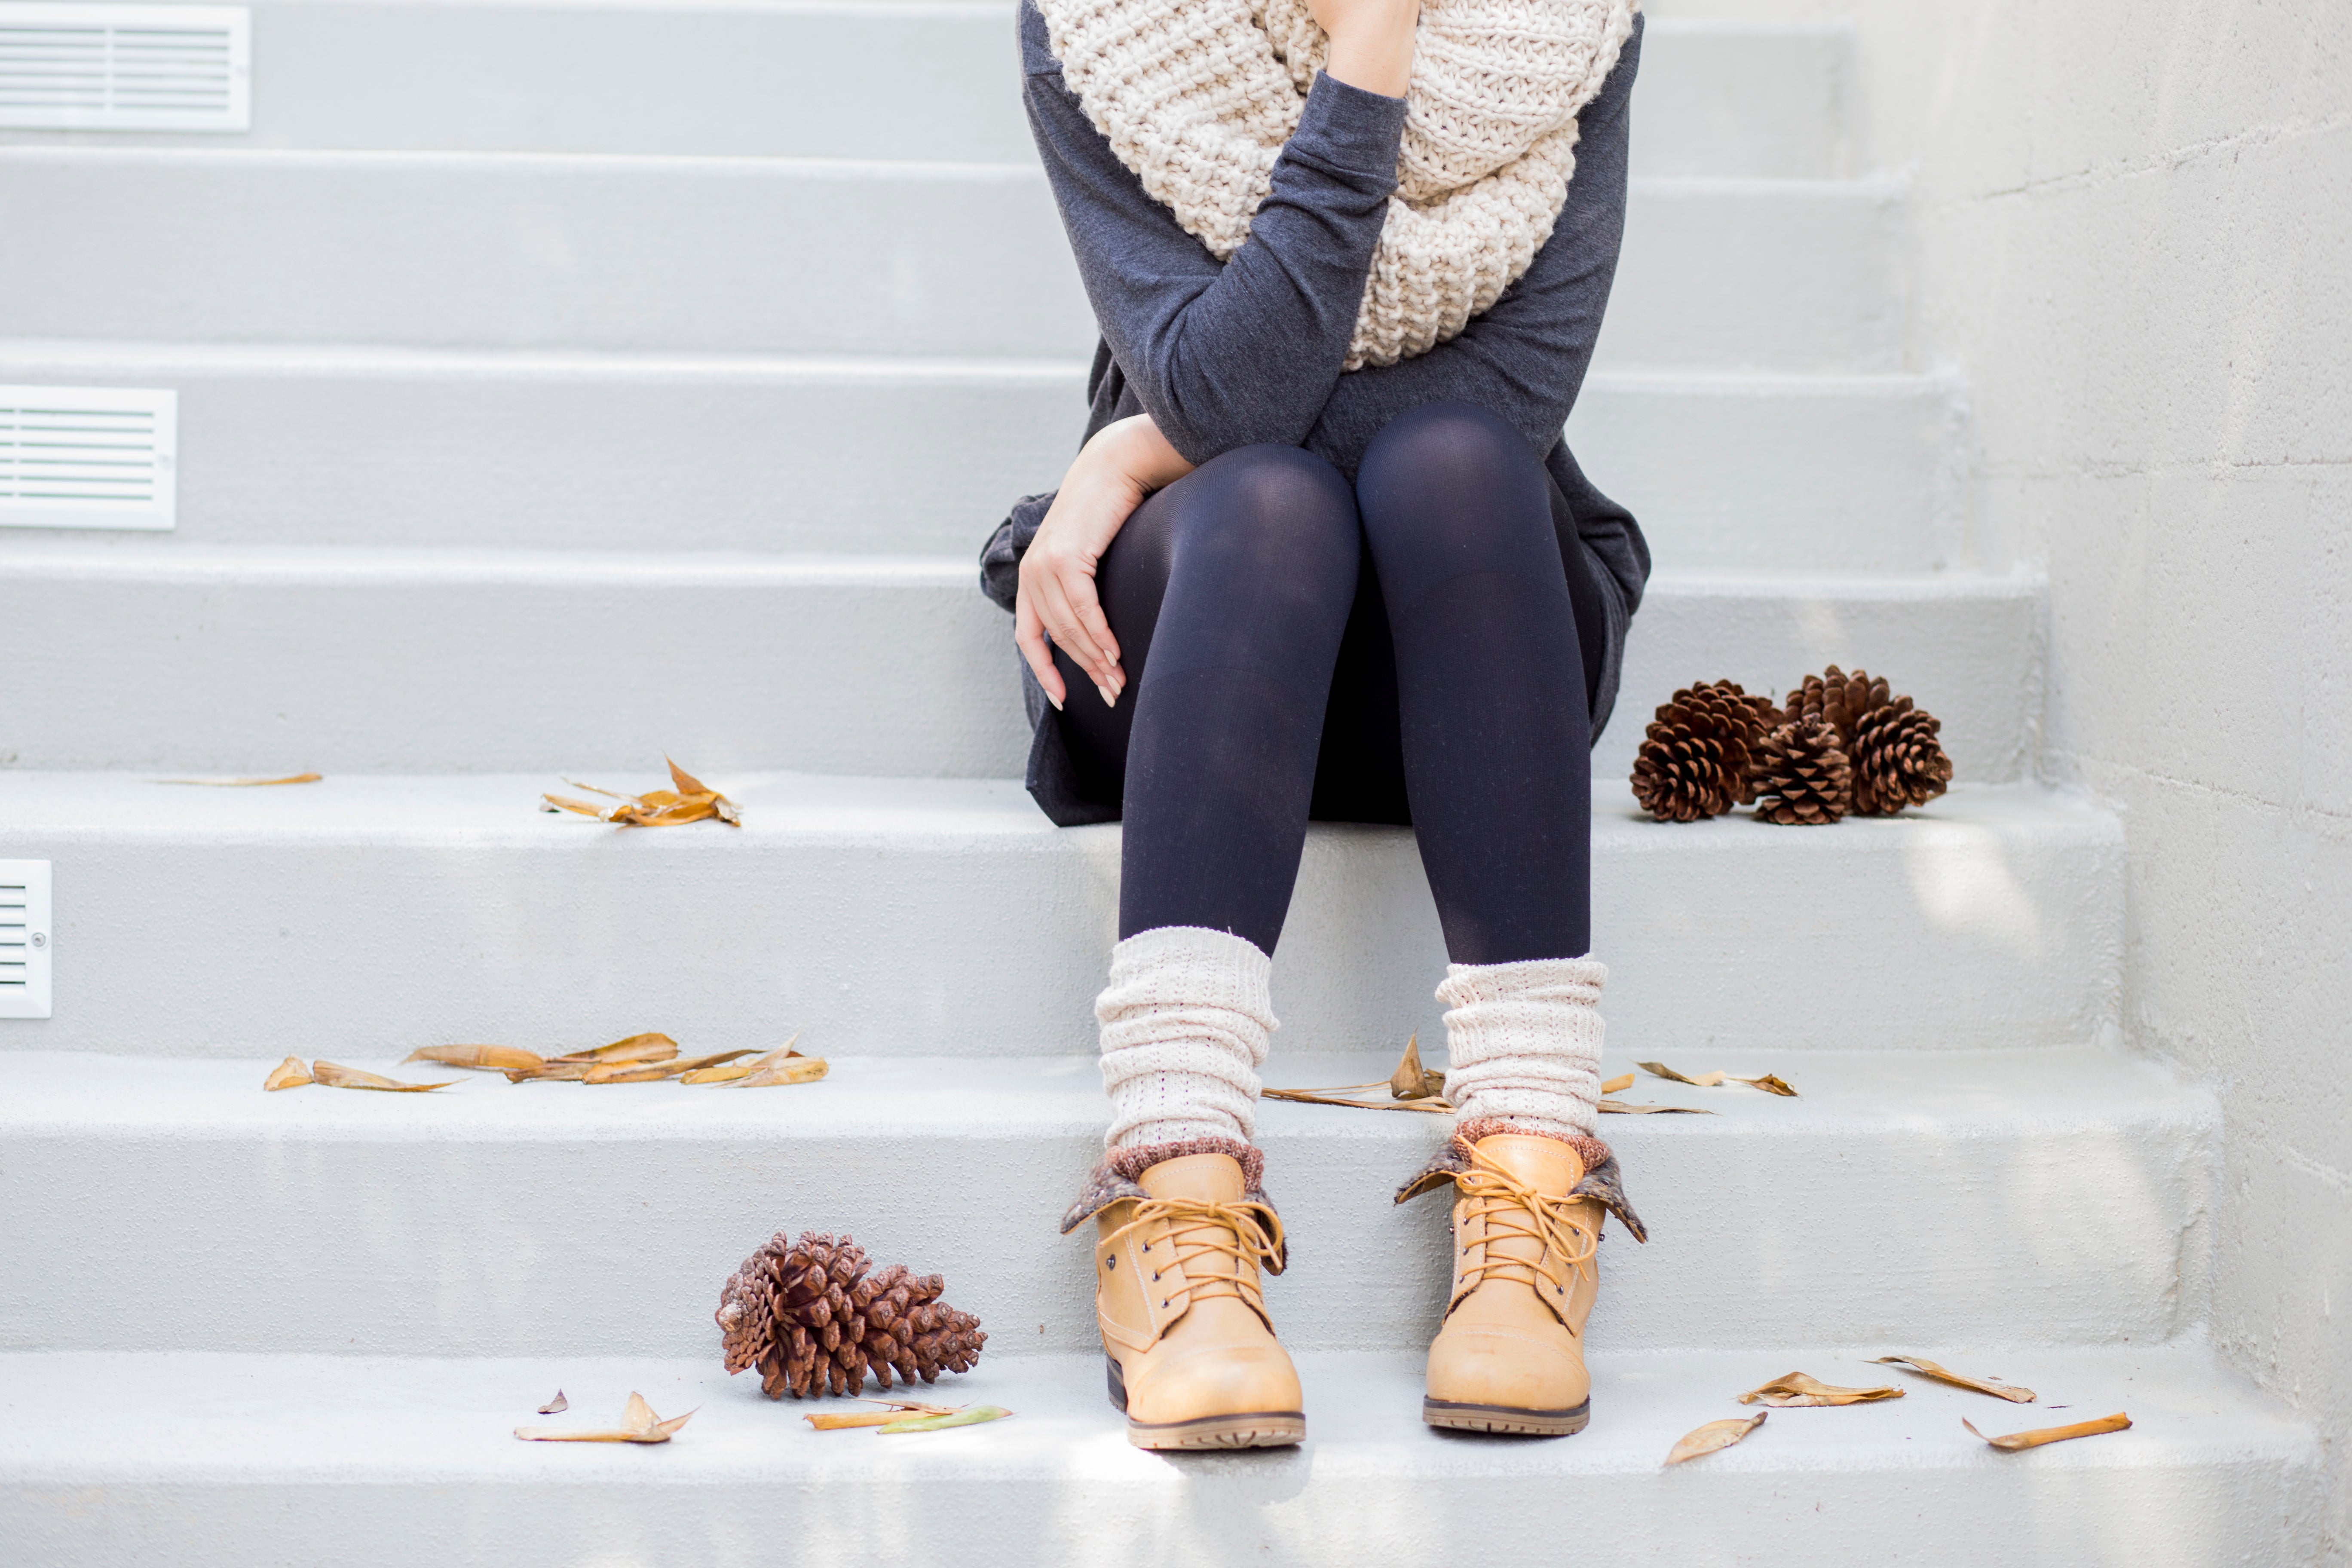 Wearing Compression Stockings in Cold Weather: FAQs + Seasonal